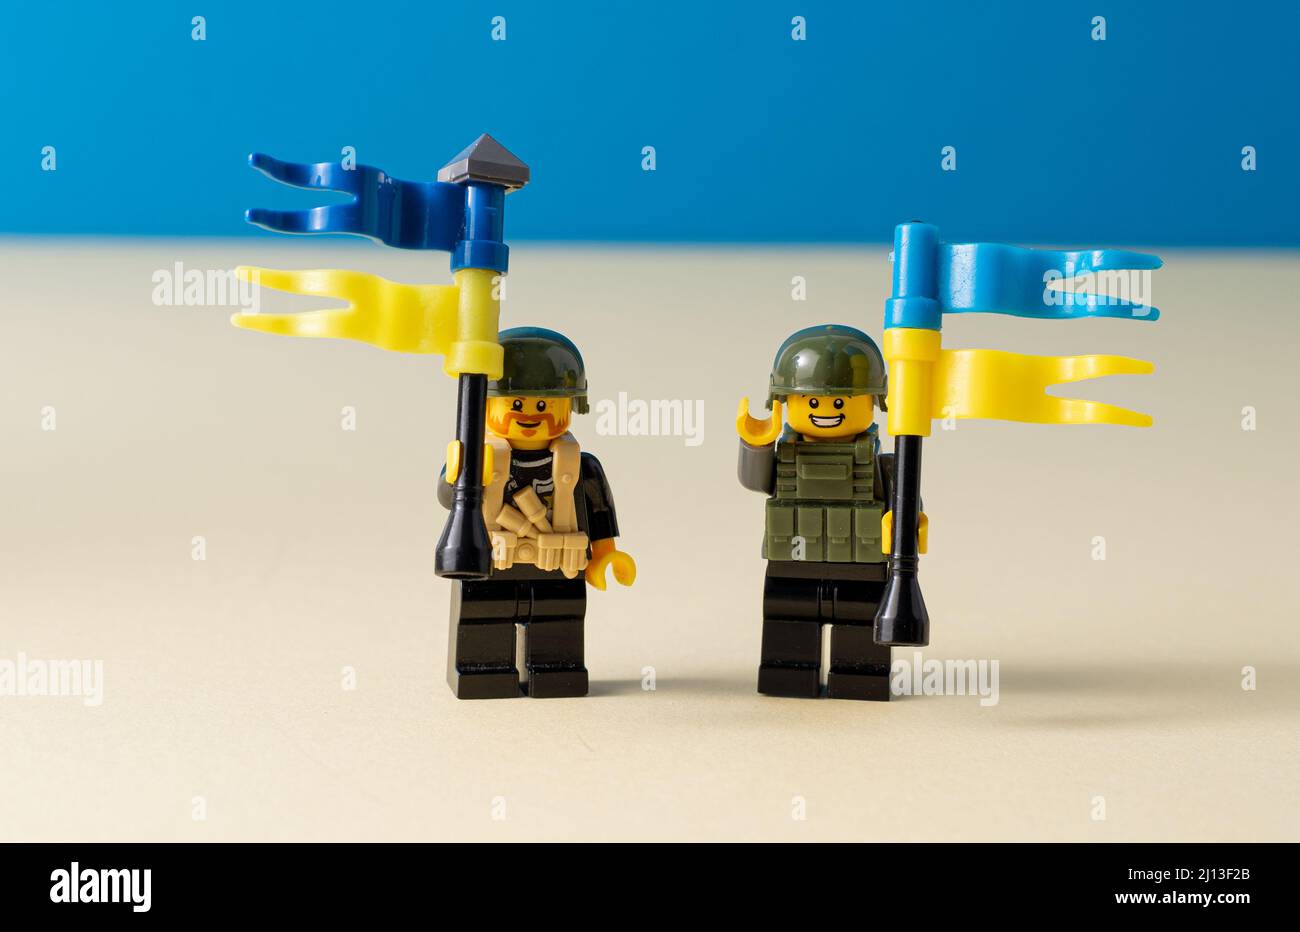 Lego little men with flags of Ukraine. A minifigure toy man holding a blue flag. Soldiers mini figure. Support of the Ukrainian people. Ukraine, Kyiv - March 20, 2022. Stock Photo